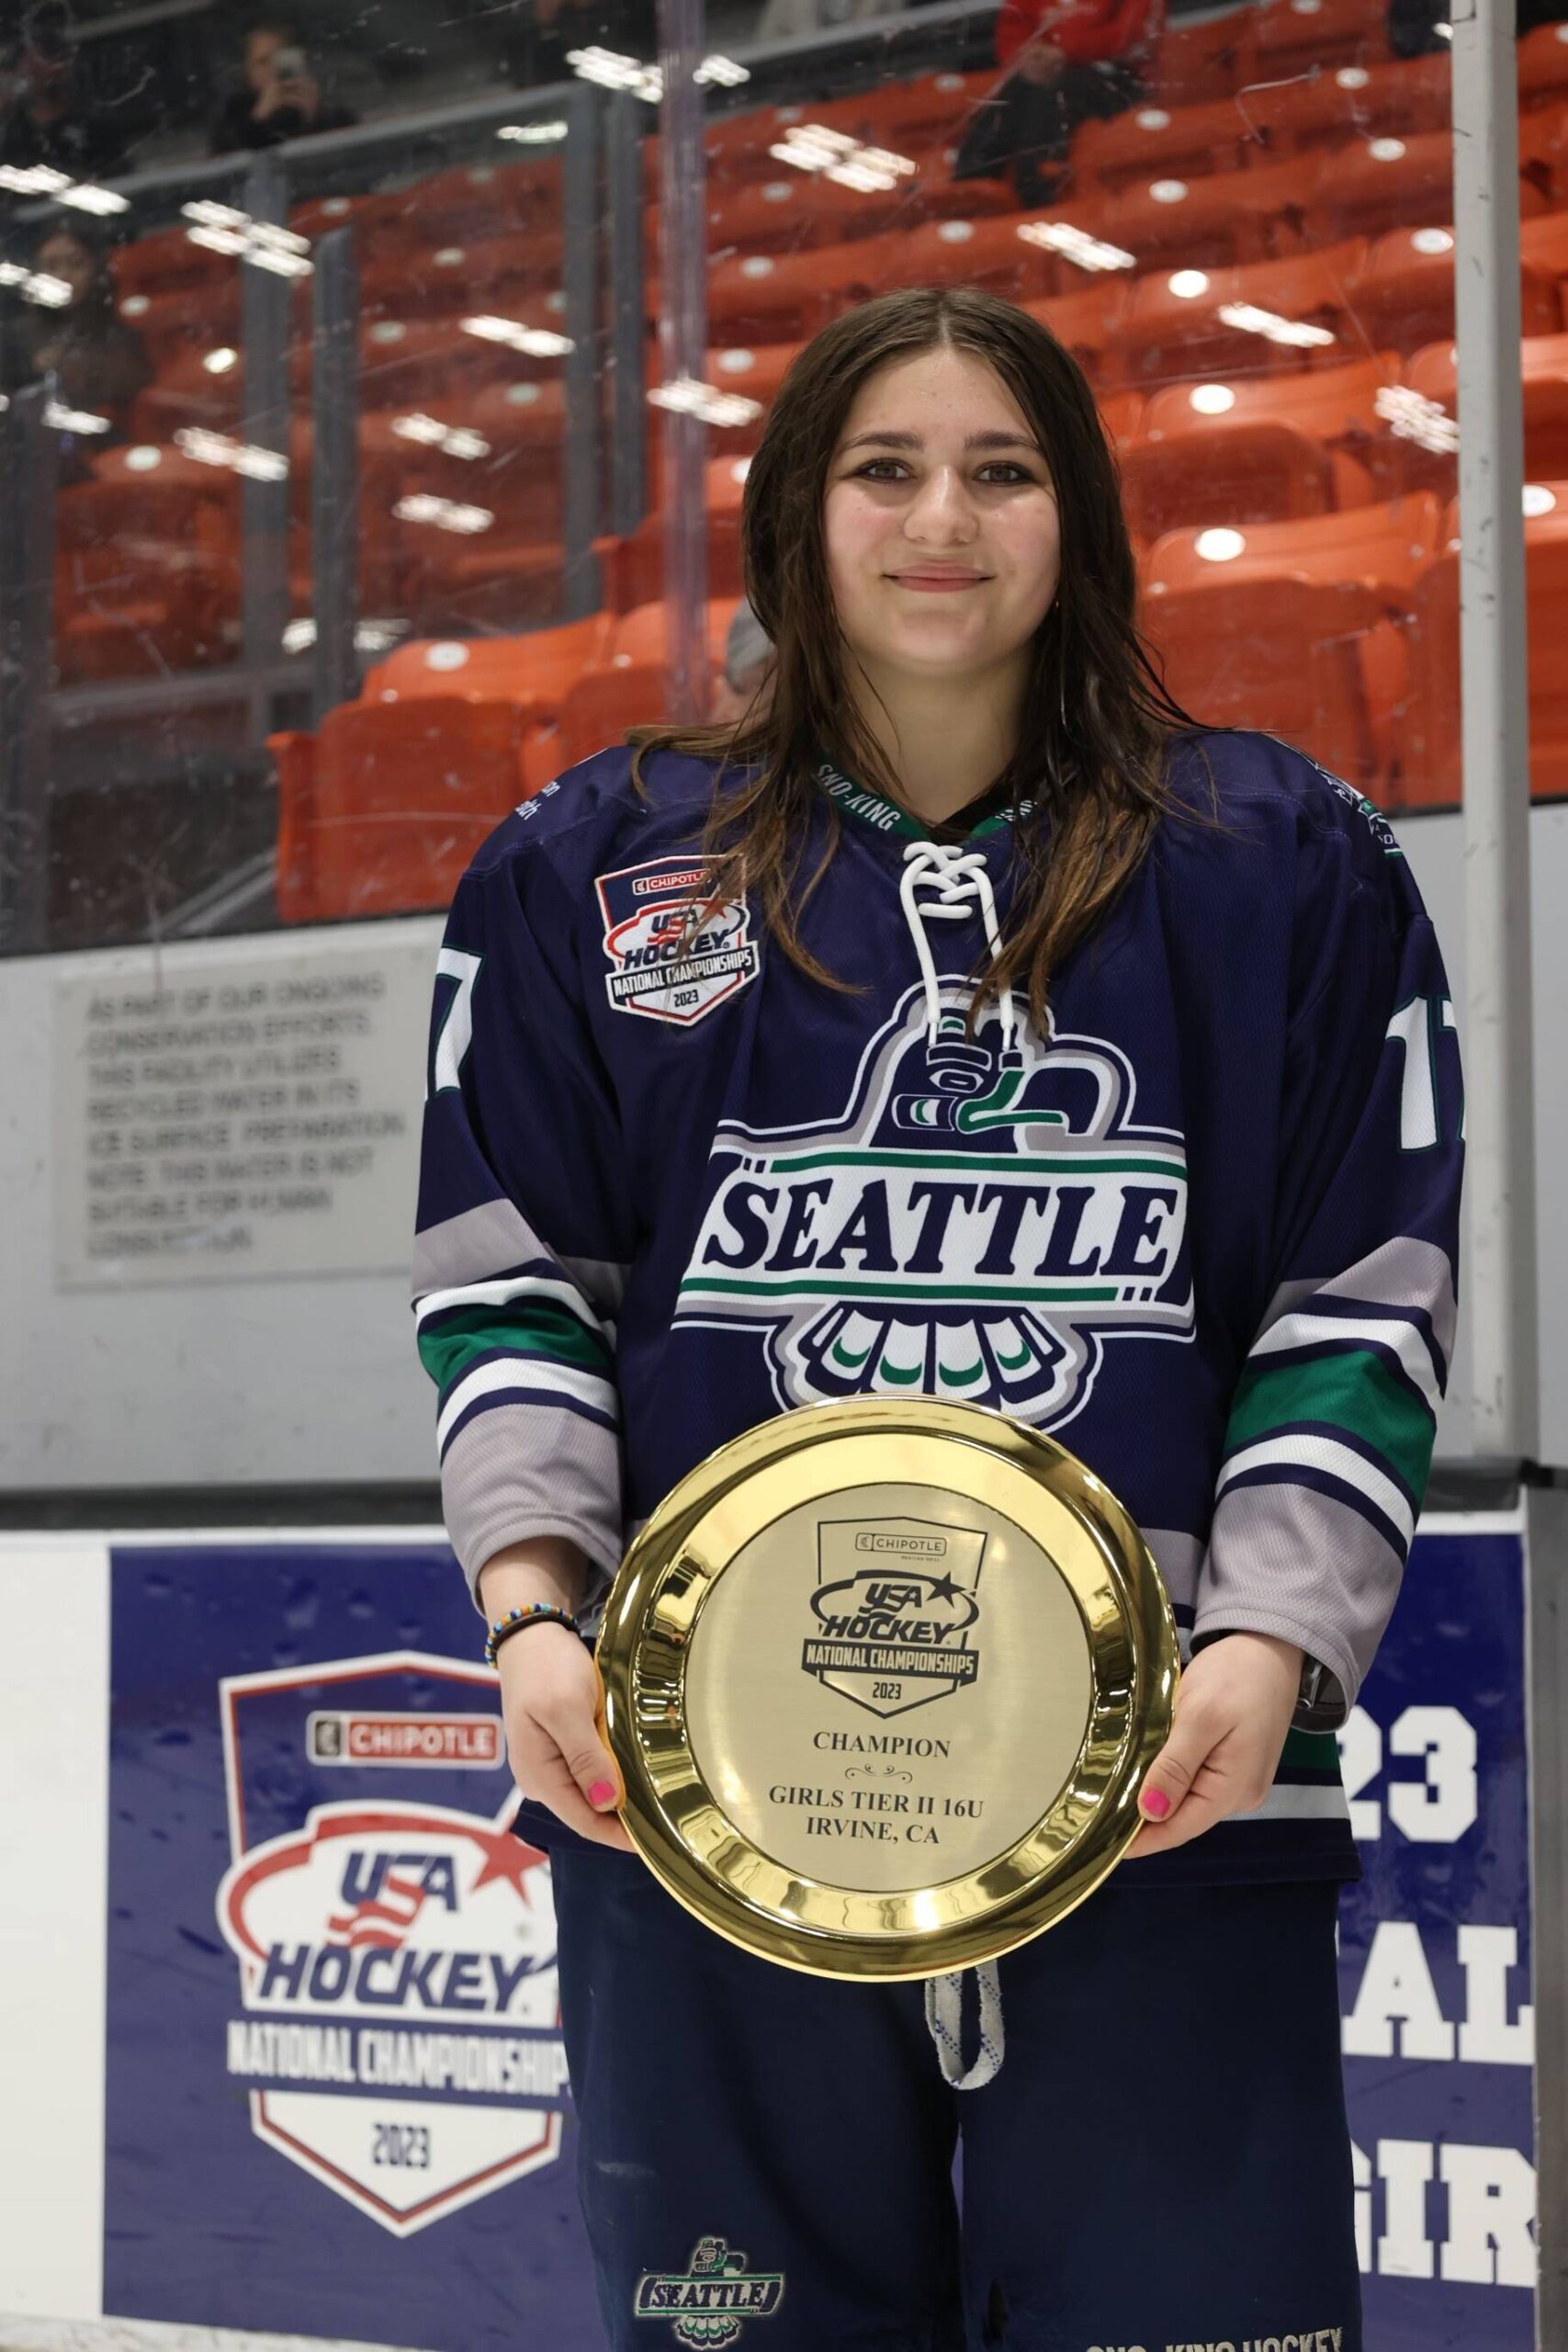 Joely Connell holds a plate at Nationals after her team became #1 in their division. Courtesy Photo, Jacqueline Connell